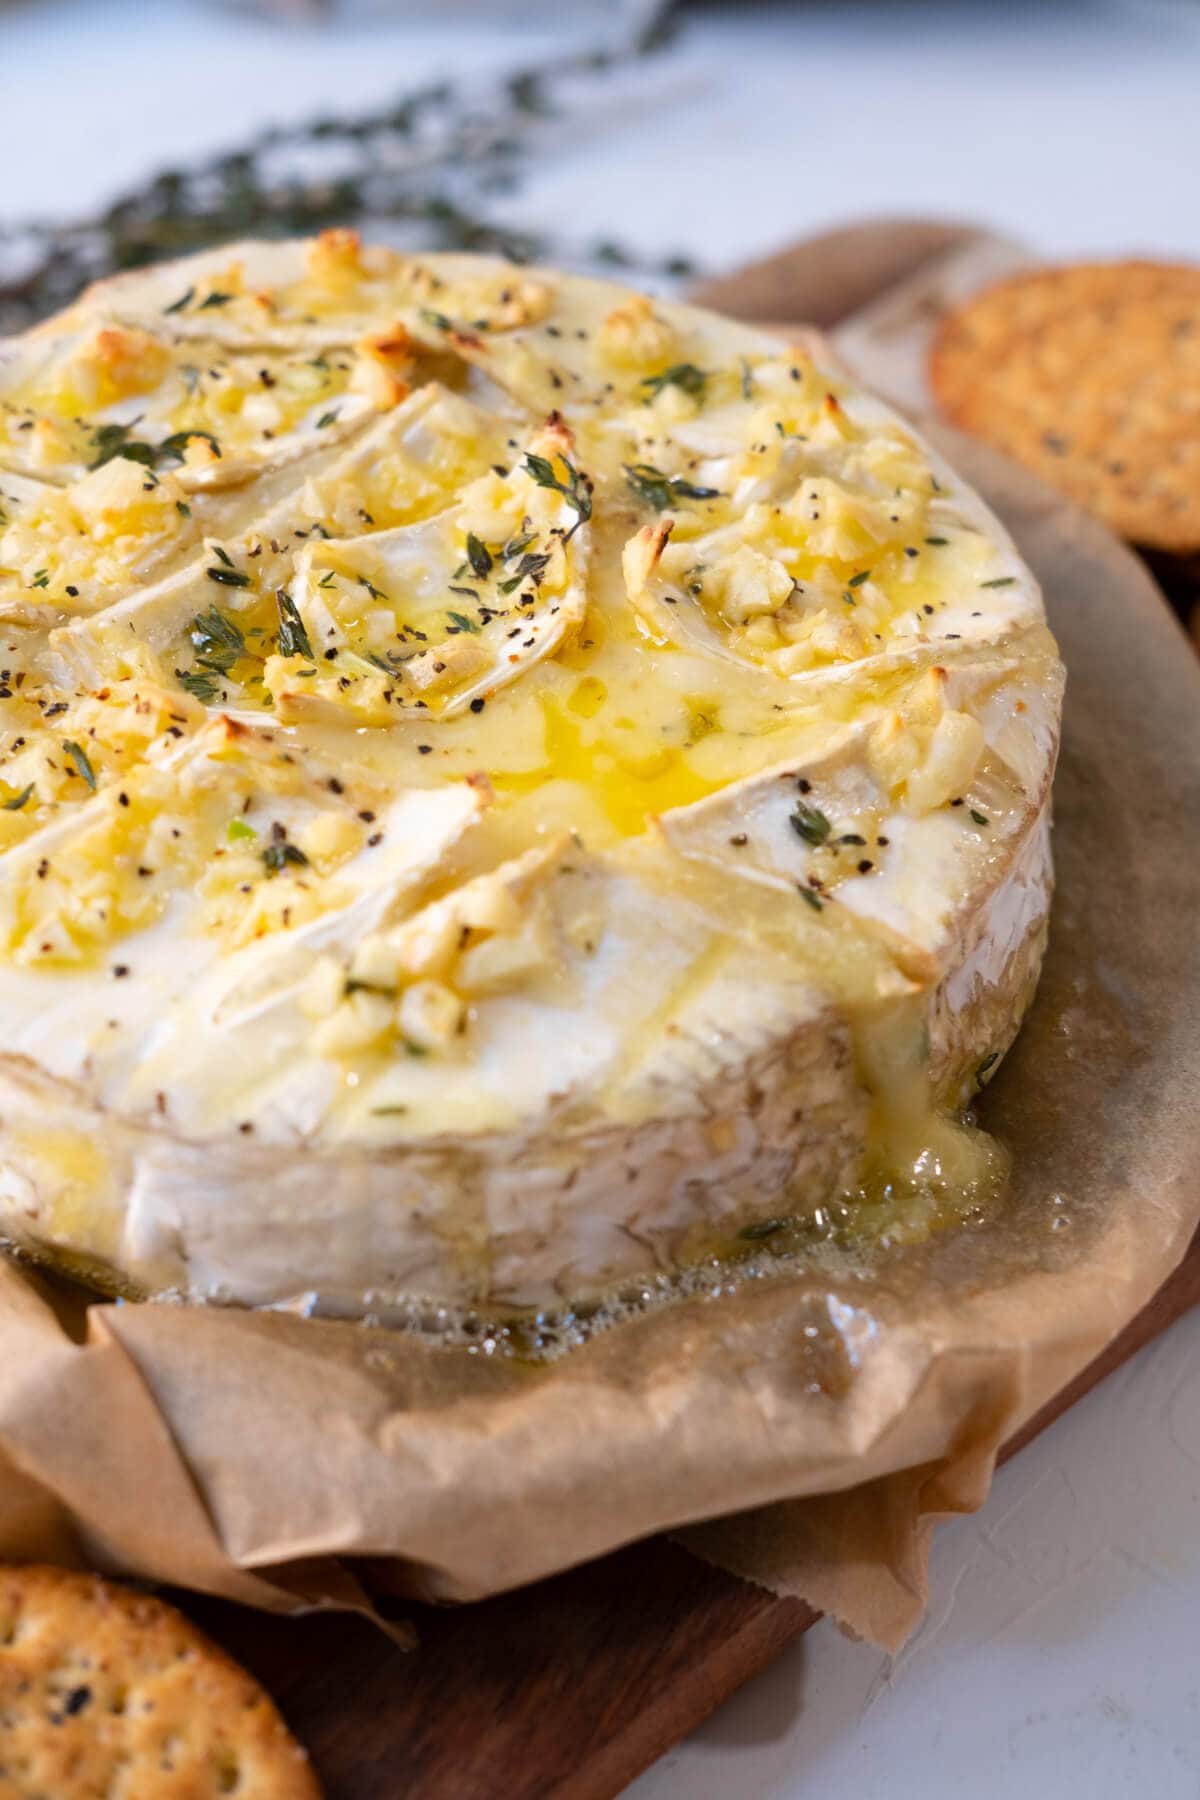 Baked brie topped with garlic and herbs and molten cheese dripping down from the edge.